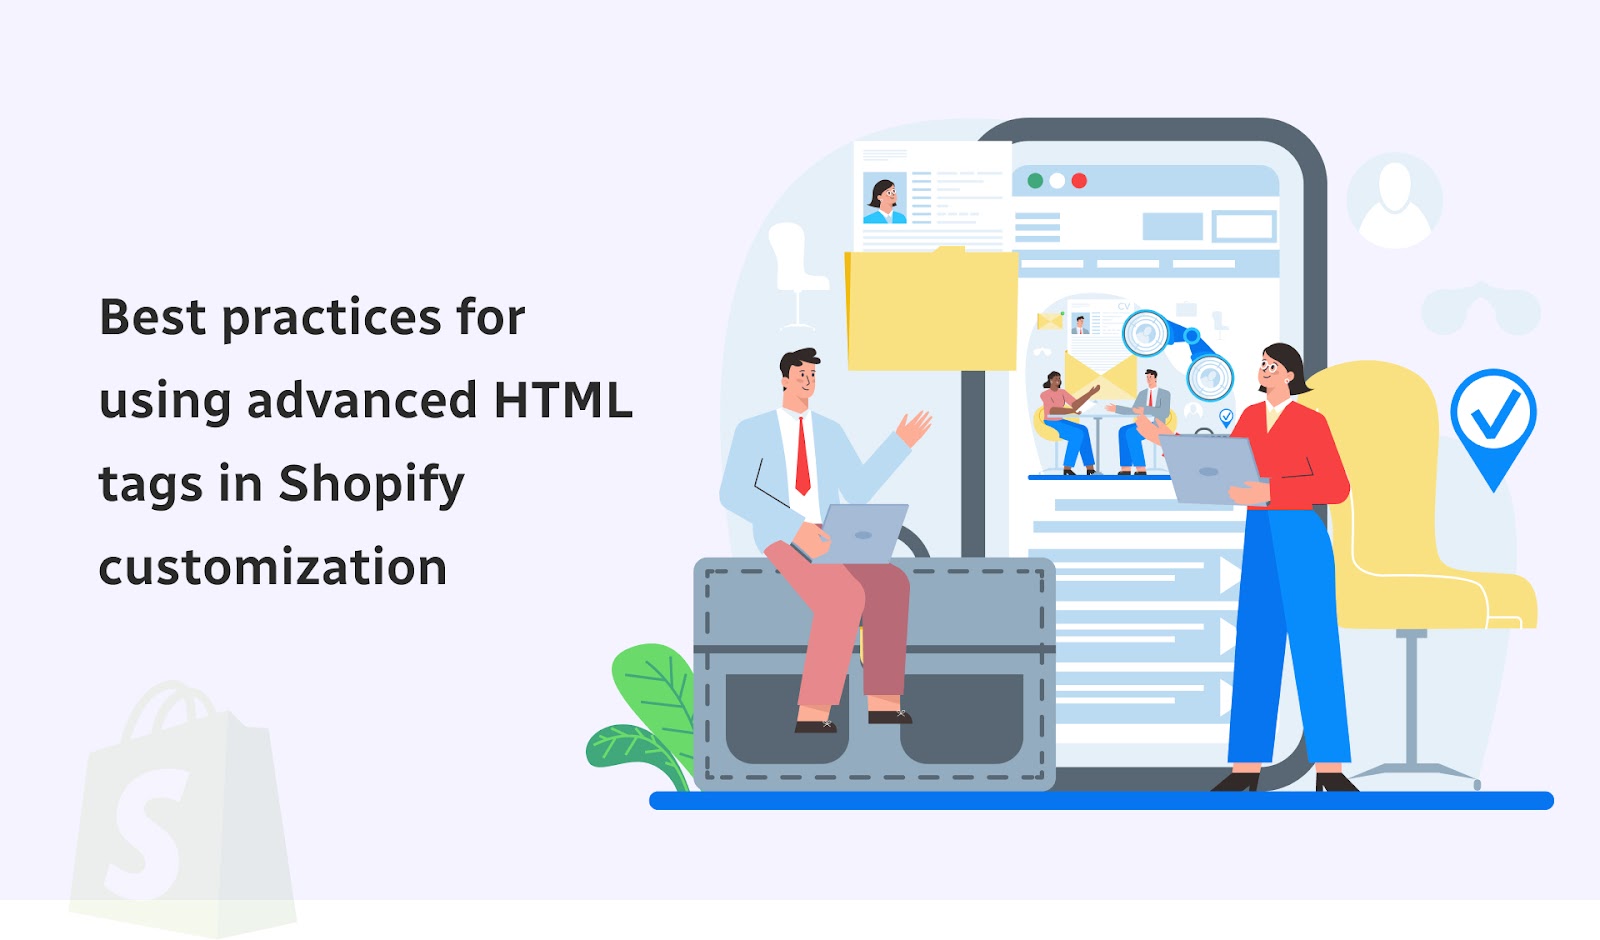 Best practices for using advanced HTML tags in Shopify customization